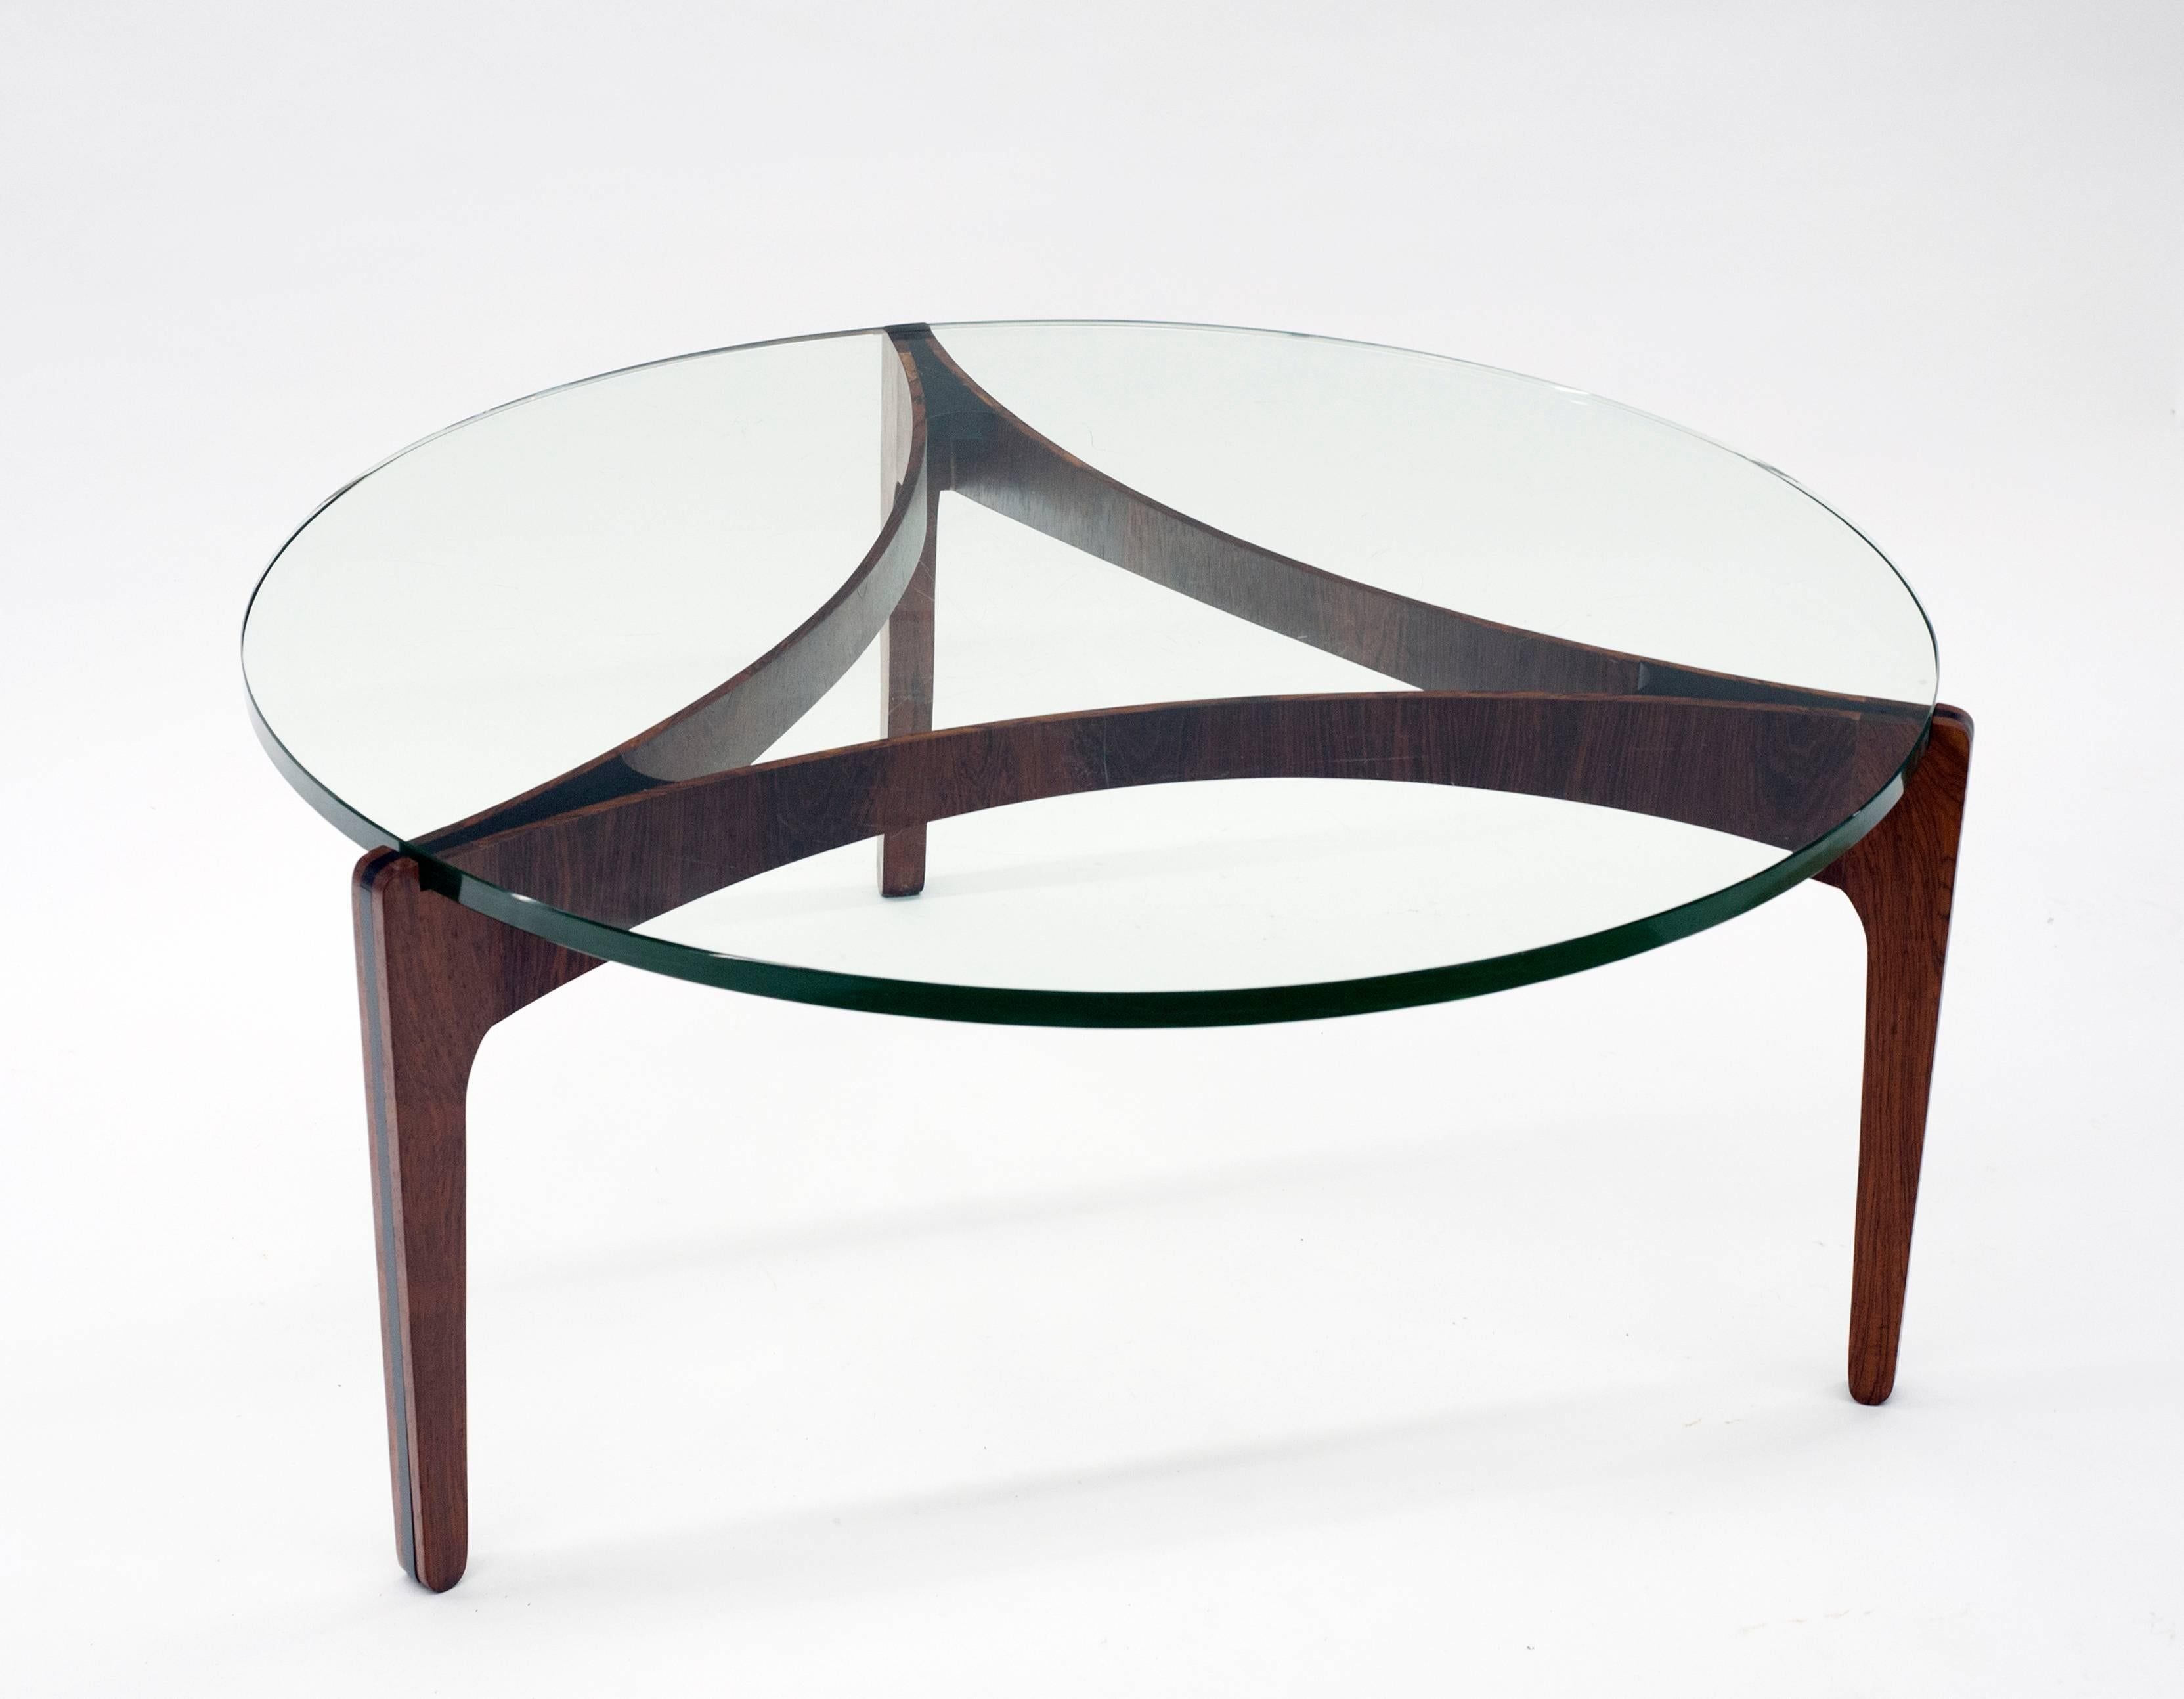 Danish Modern Rosewood and Ebony Glass Coffee Table by Sven Ellekaer, 1962 In Excellent Condition In Washington, DC